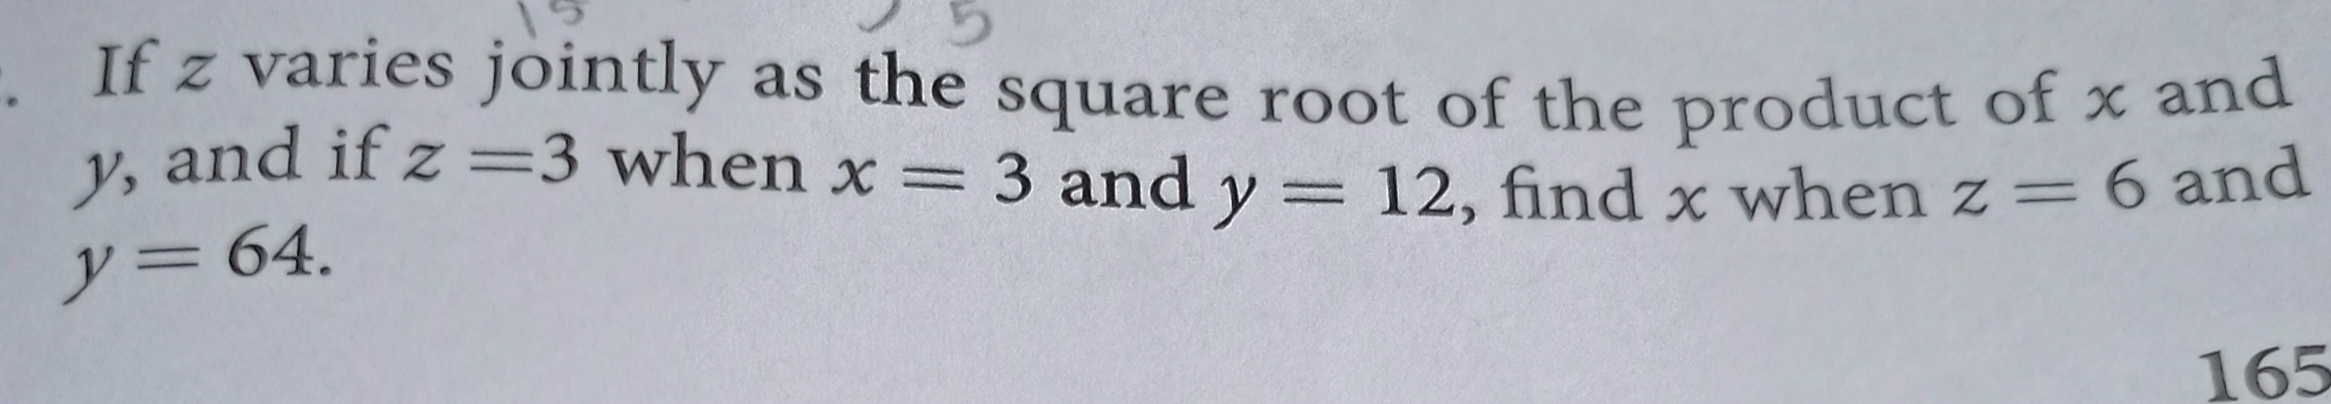 If z varies jointly as the square root of the product of x and y, and if z=3 when x=3 and y=12 , find x when z=6 and y=64. 165